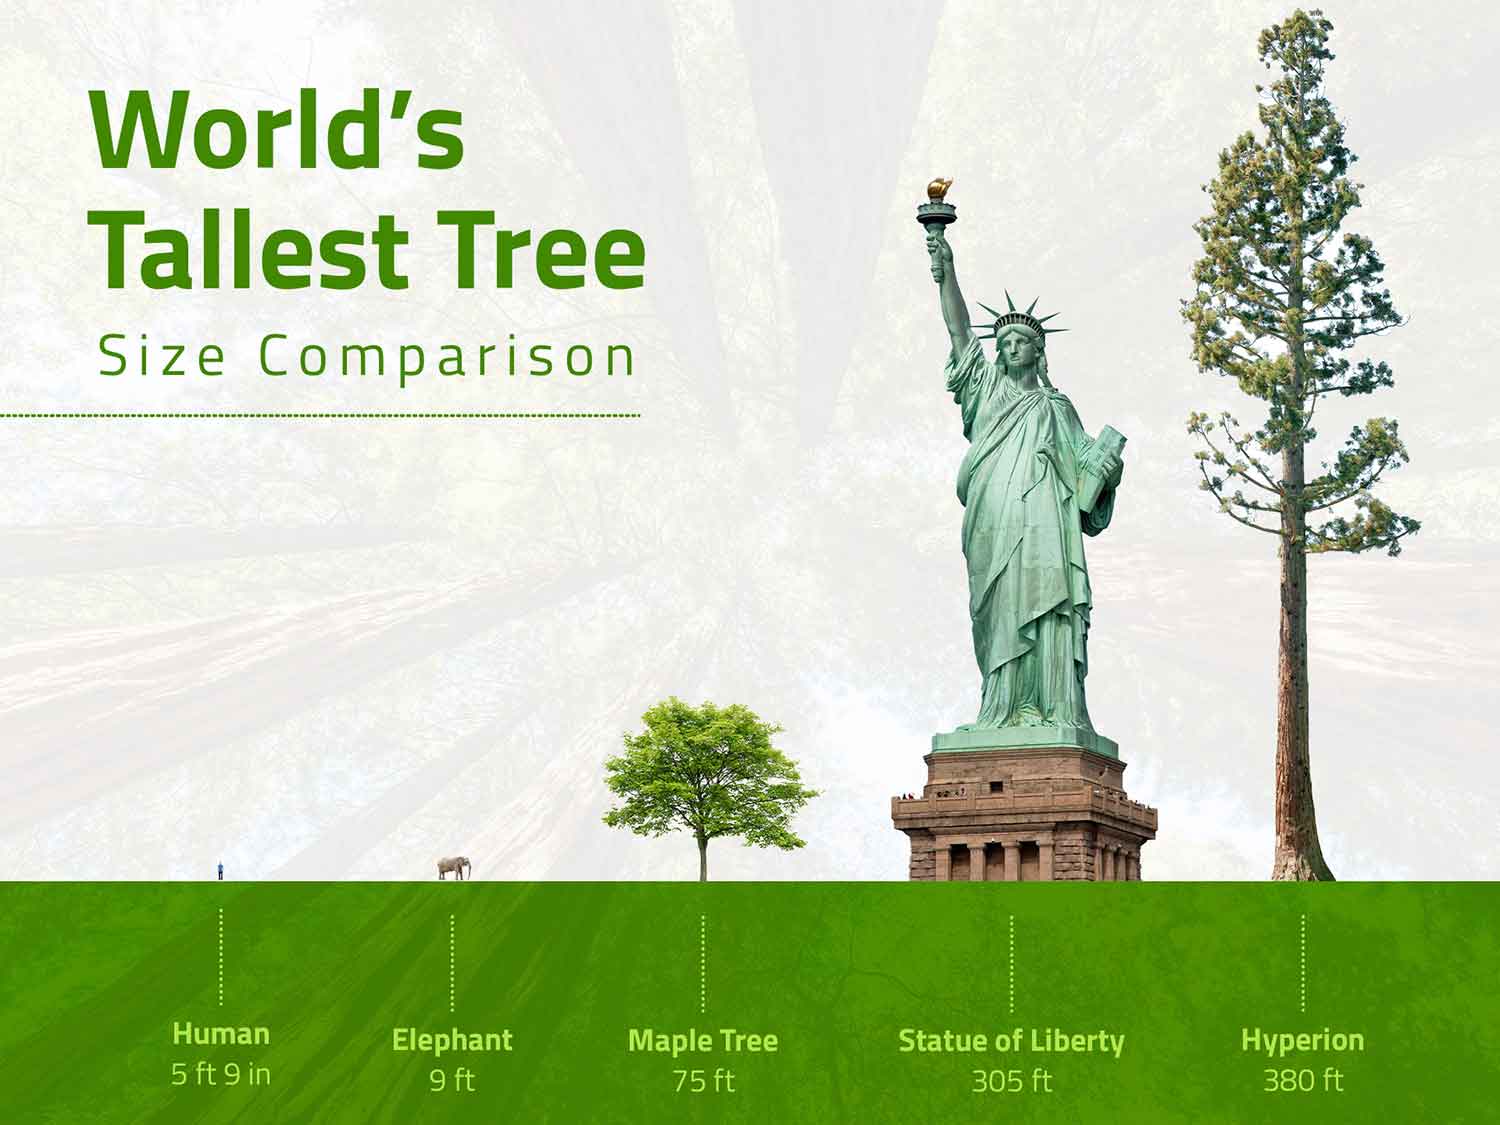 Illustration comparing the heights of a man, an elephant, a maple tree, the Statue of Liberty, and Hyperion